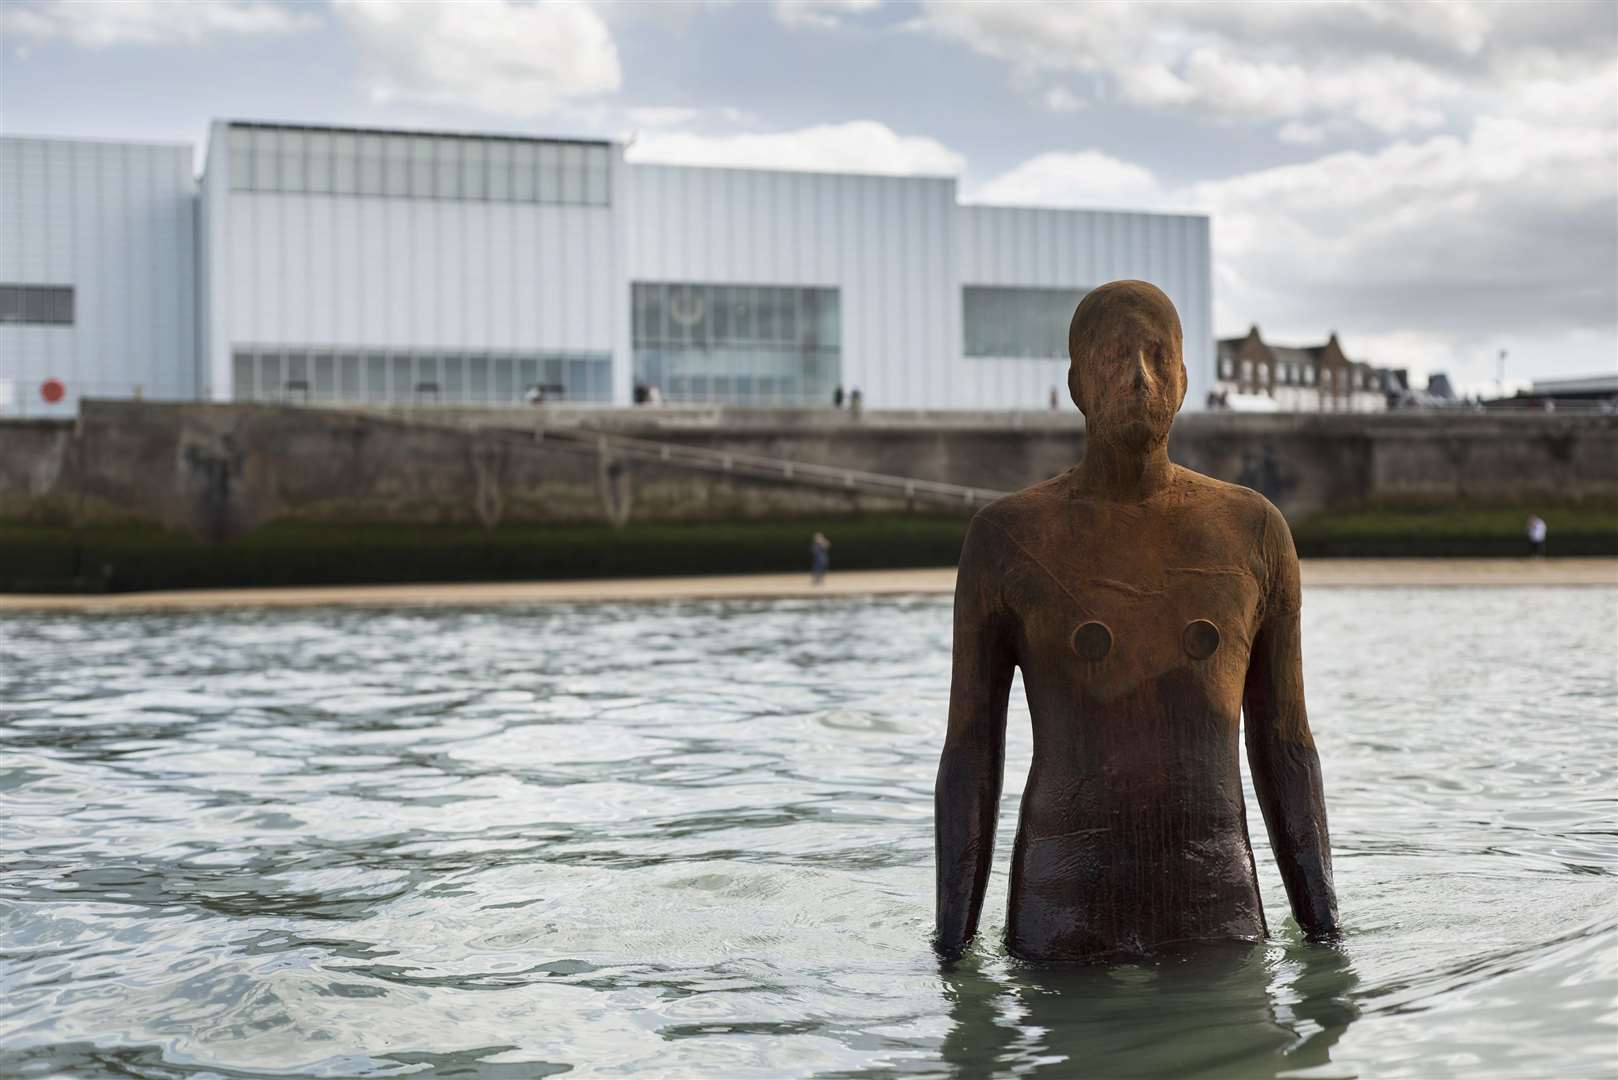 Another of his statues was placed in Margate